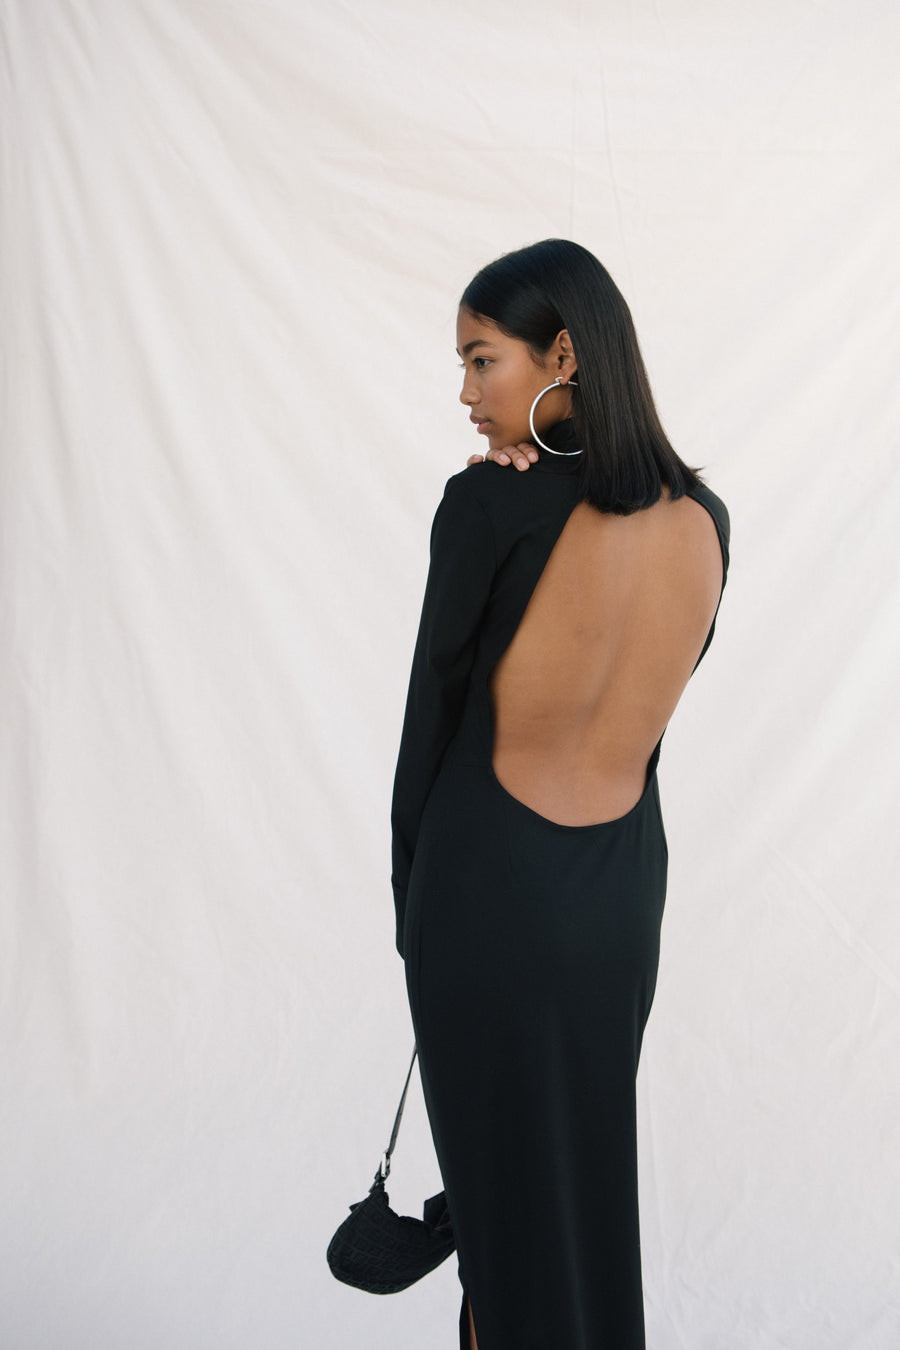 The Backless Dress